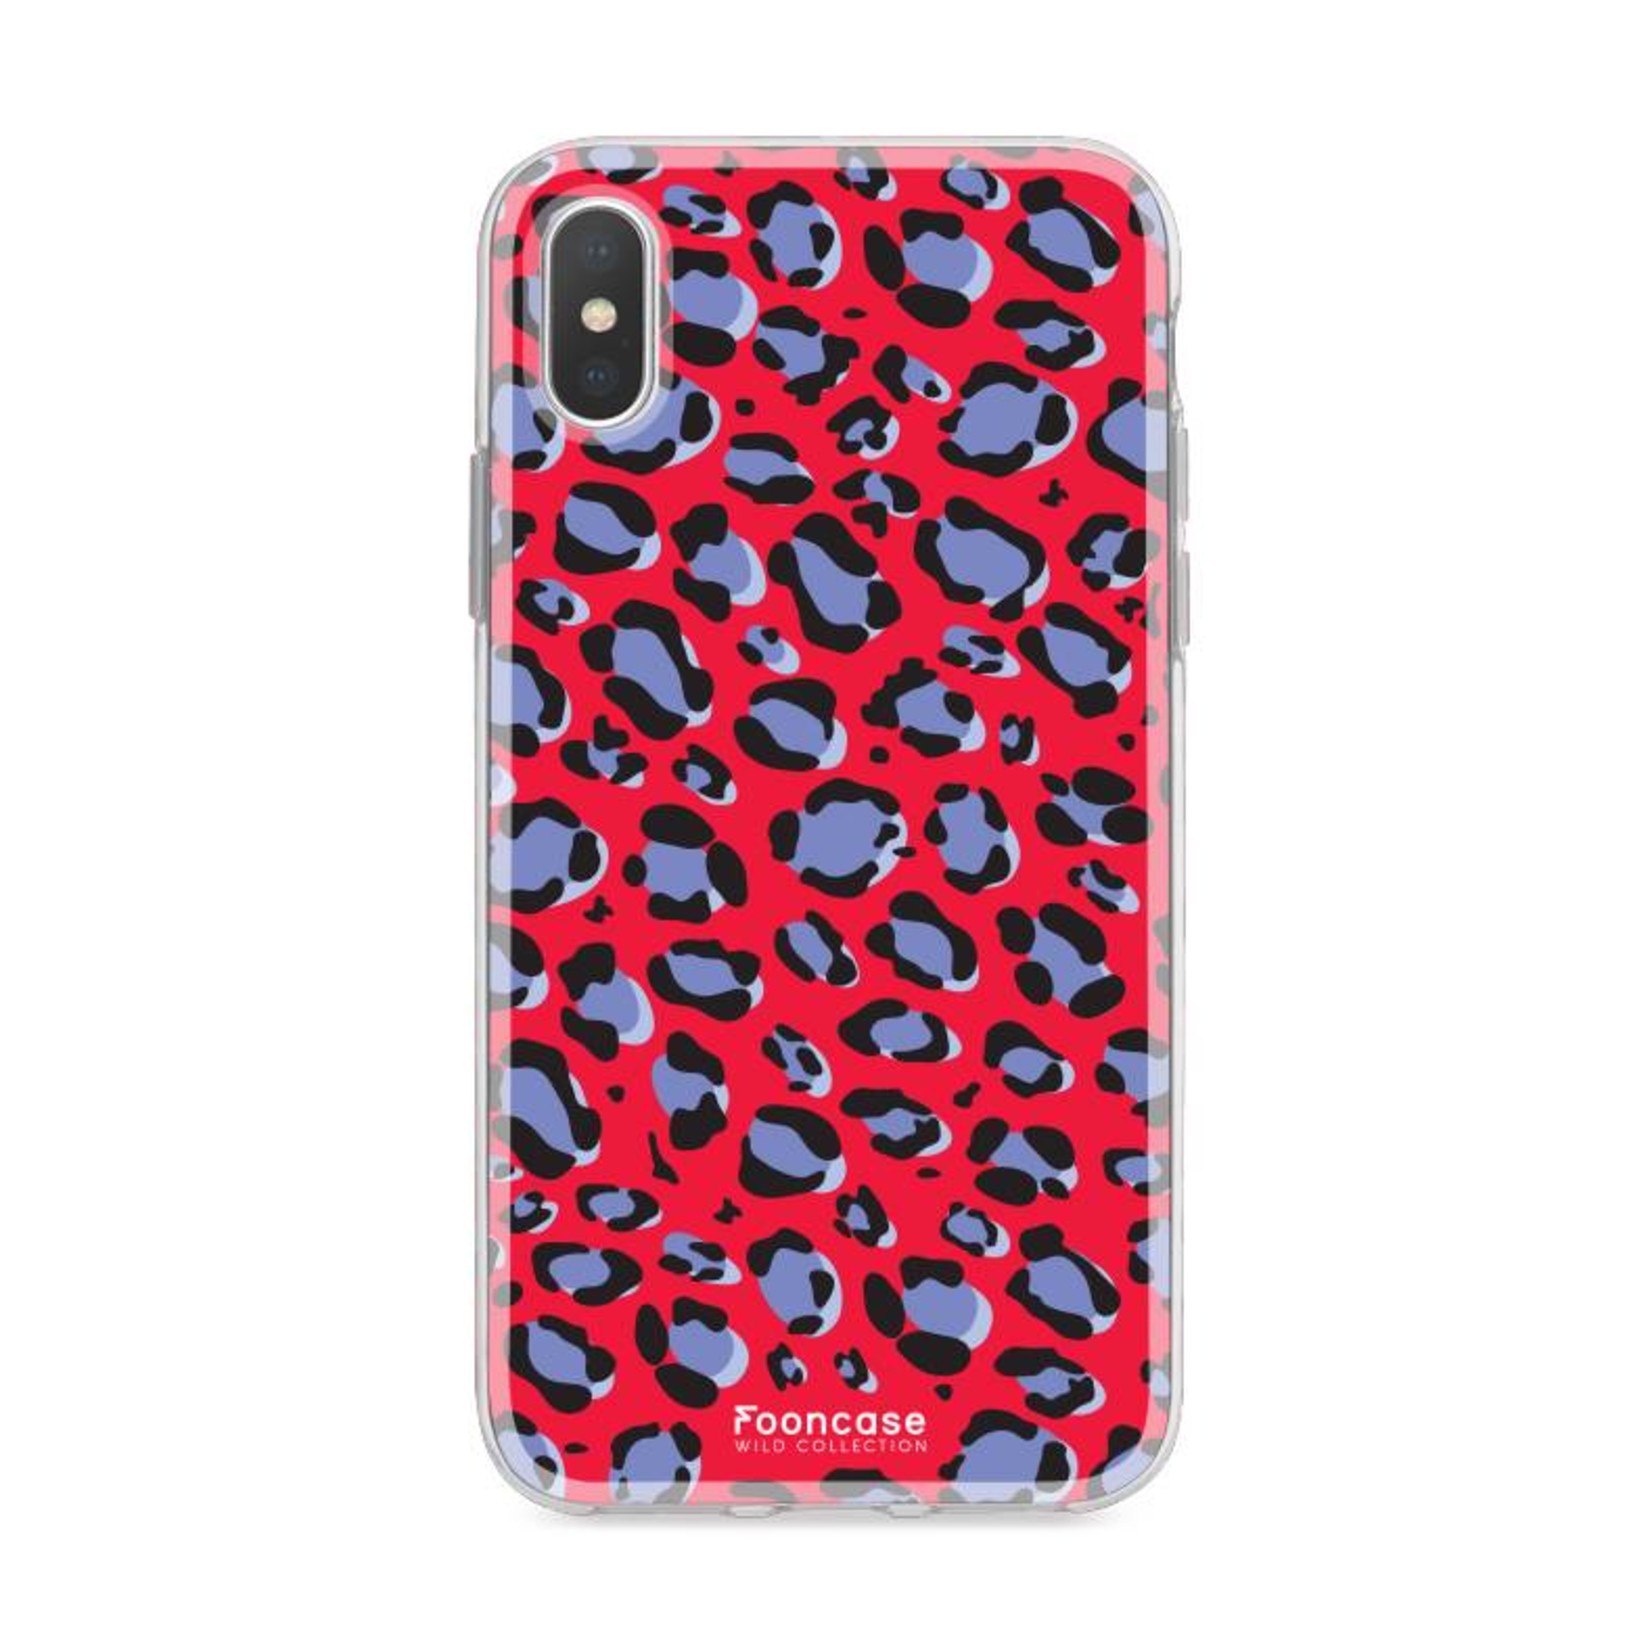 FOONCASE Iphone XS Max - WILD COLLECTION / Rosso